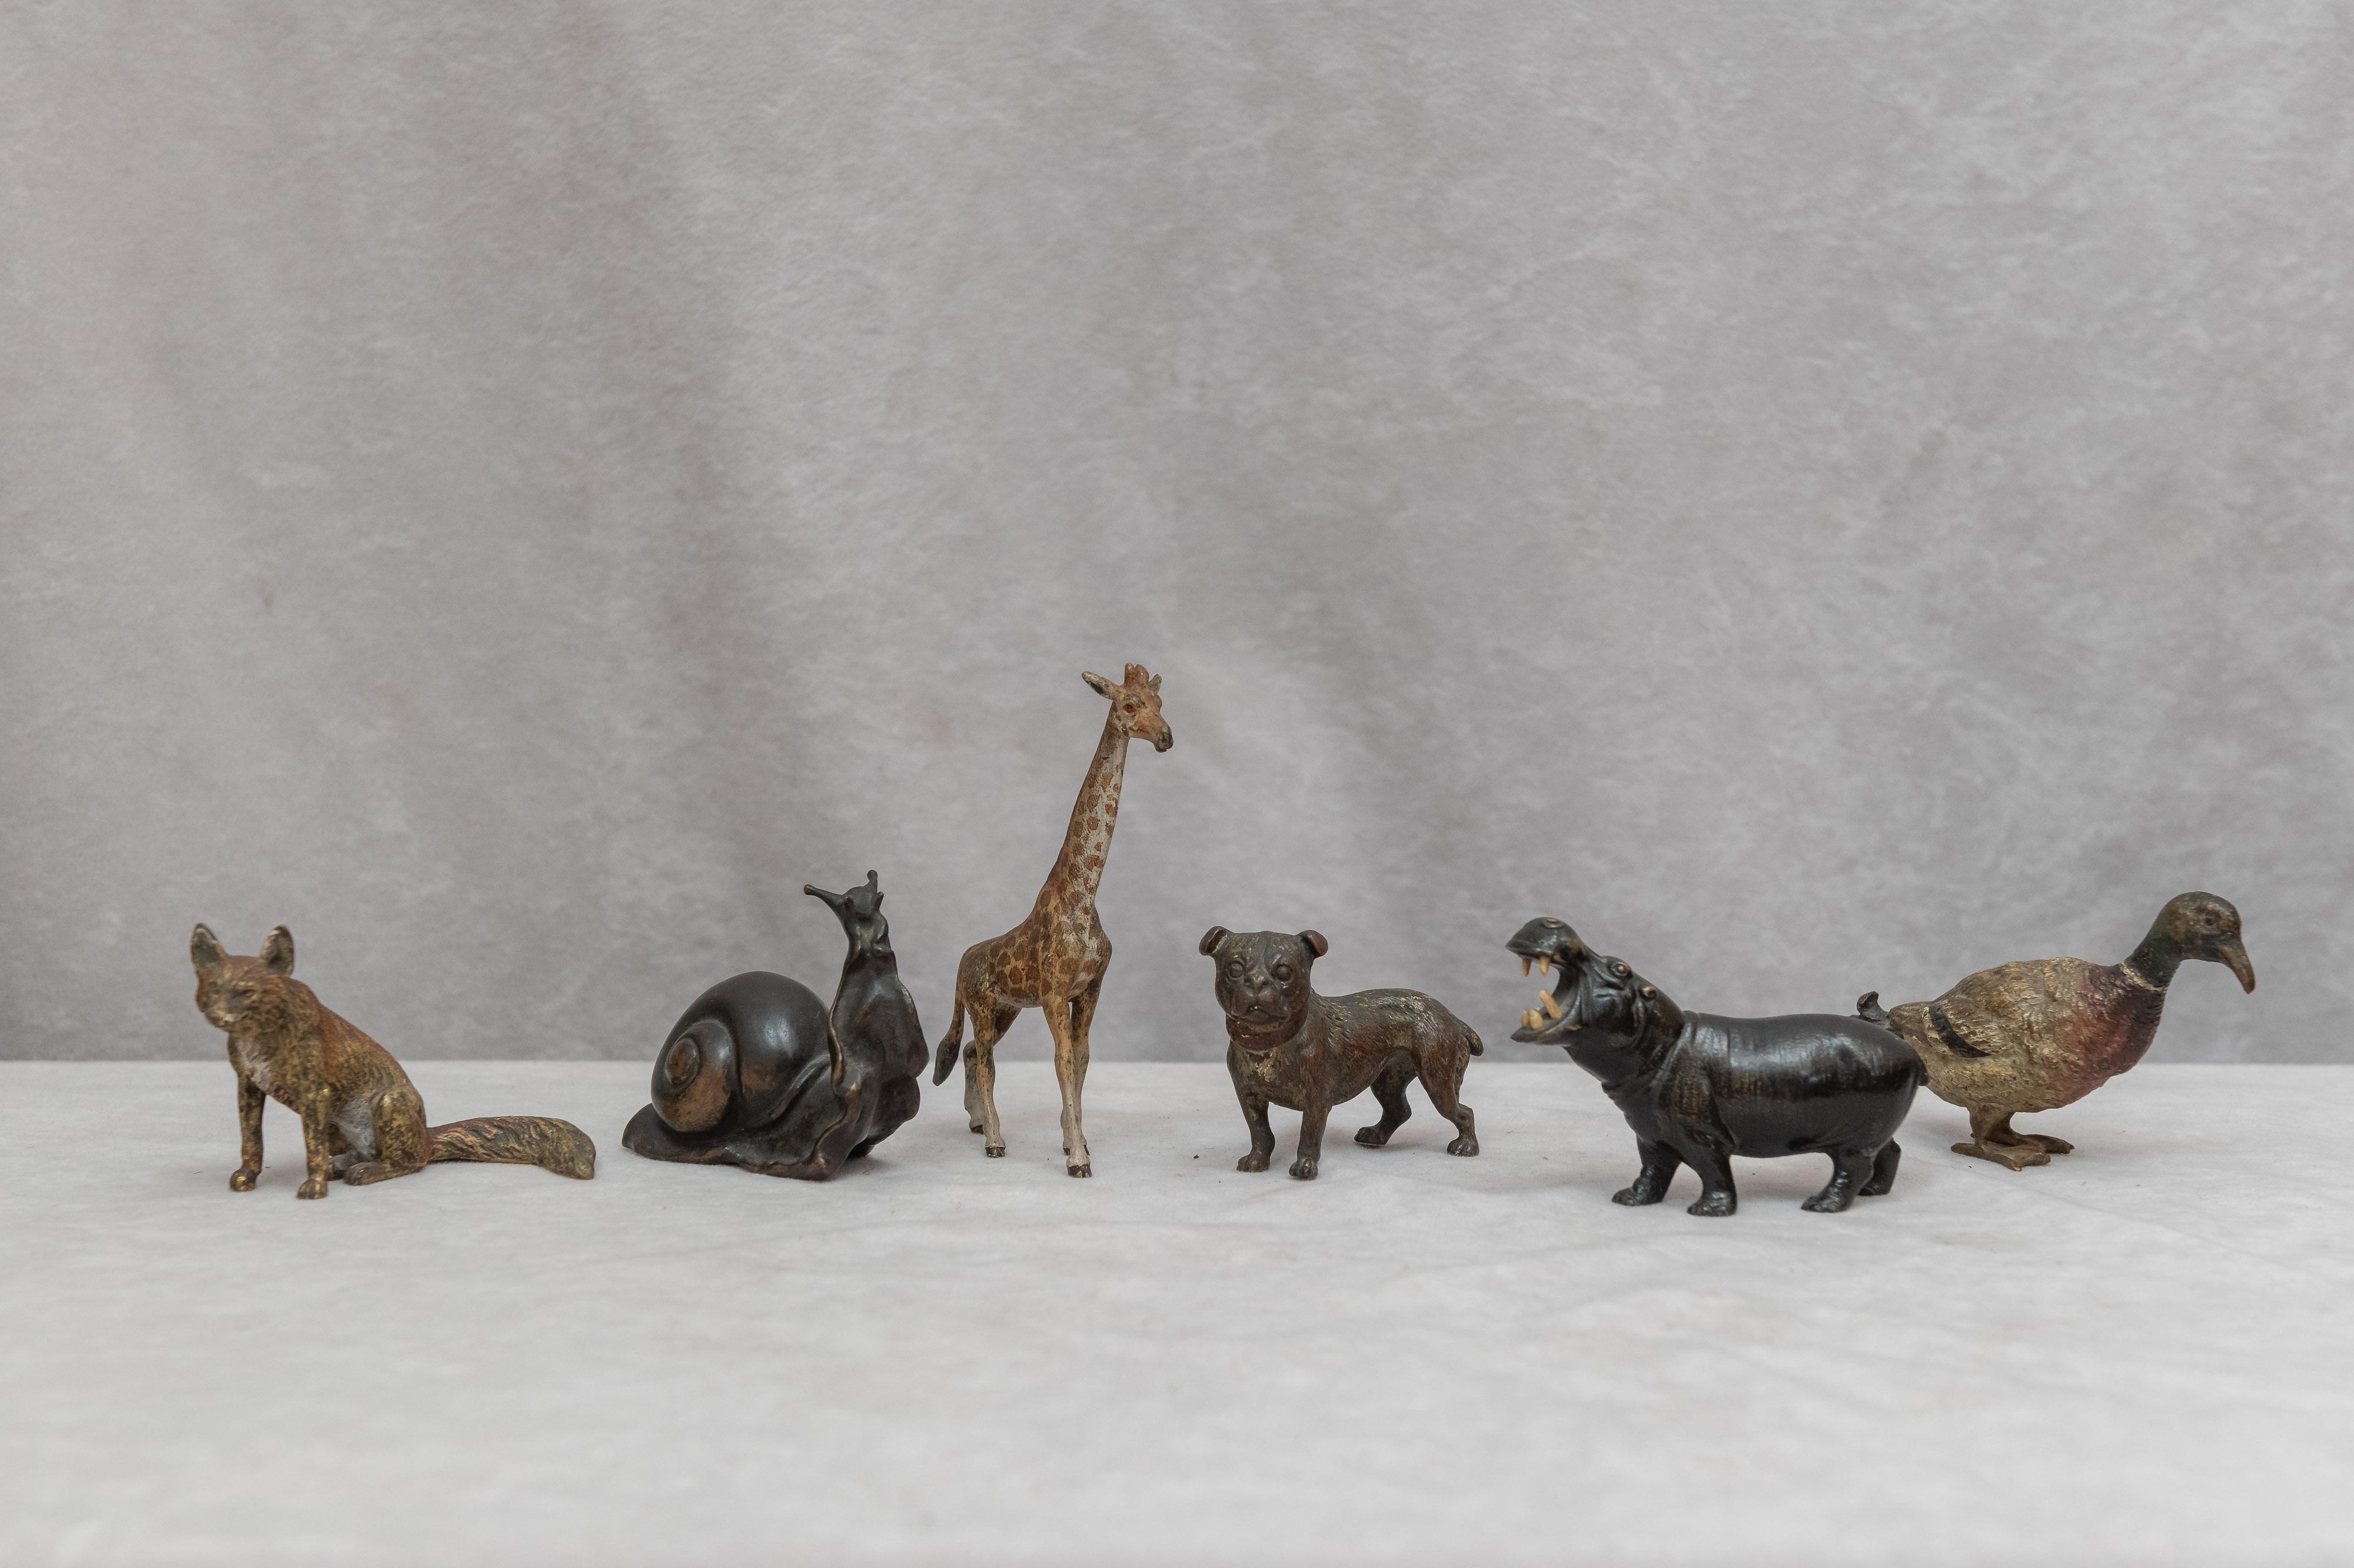 Offering a wonderful collection of Vienna bronze animals. All are cold painted except for the snail, which is still nicely patinated. There are several very unusual animals in this collection to include a giraffe and a hippo. The poor hippo is